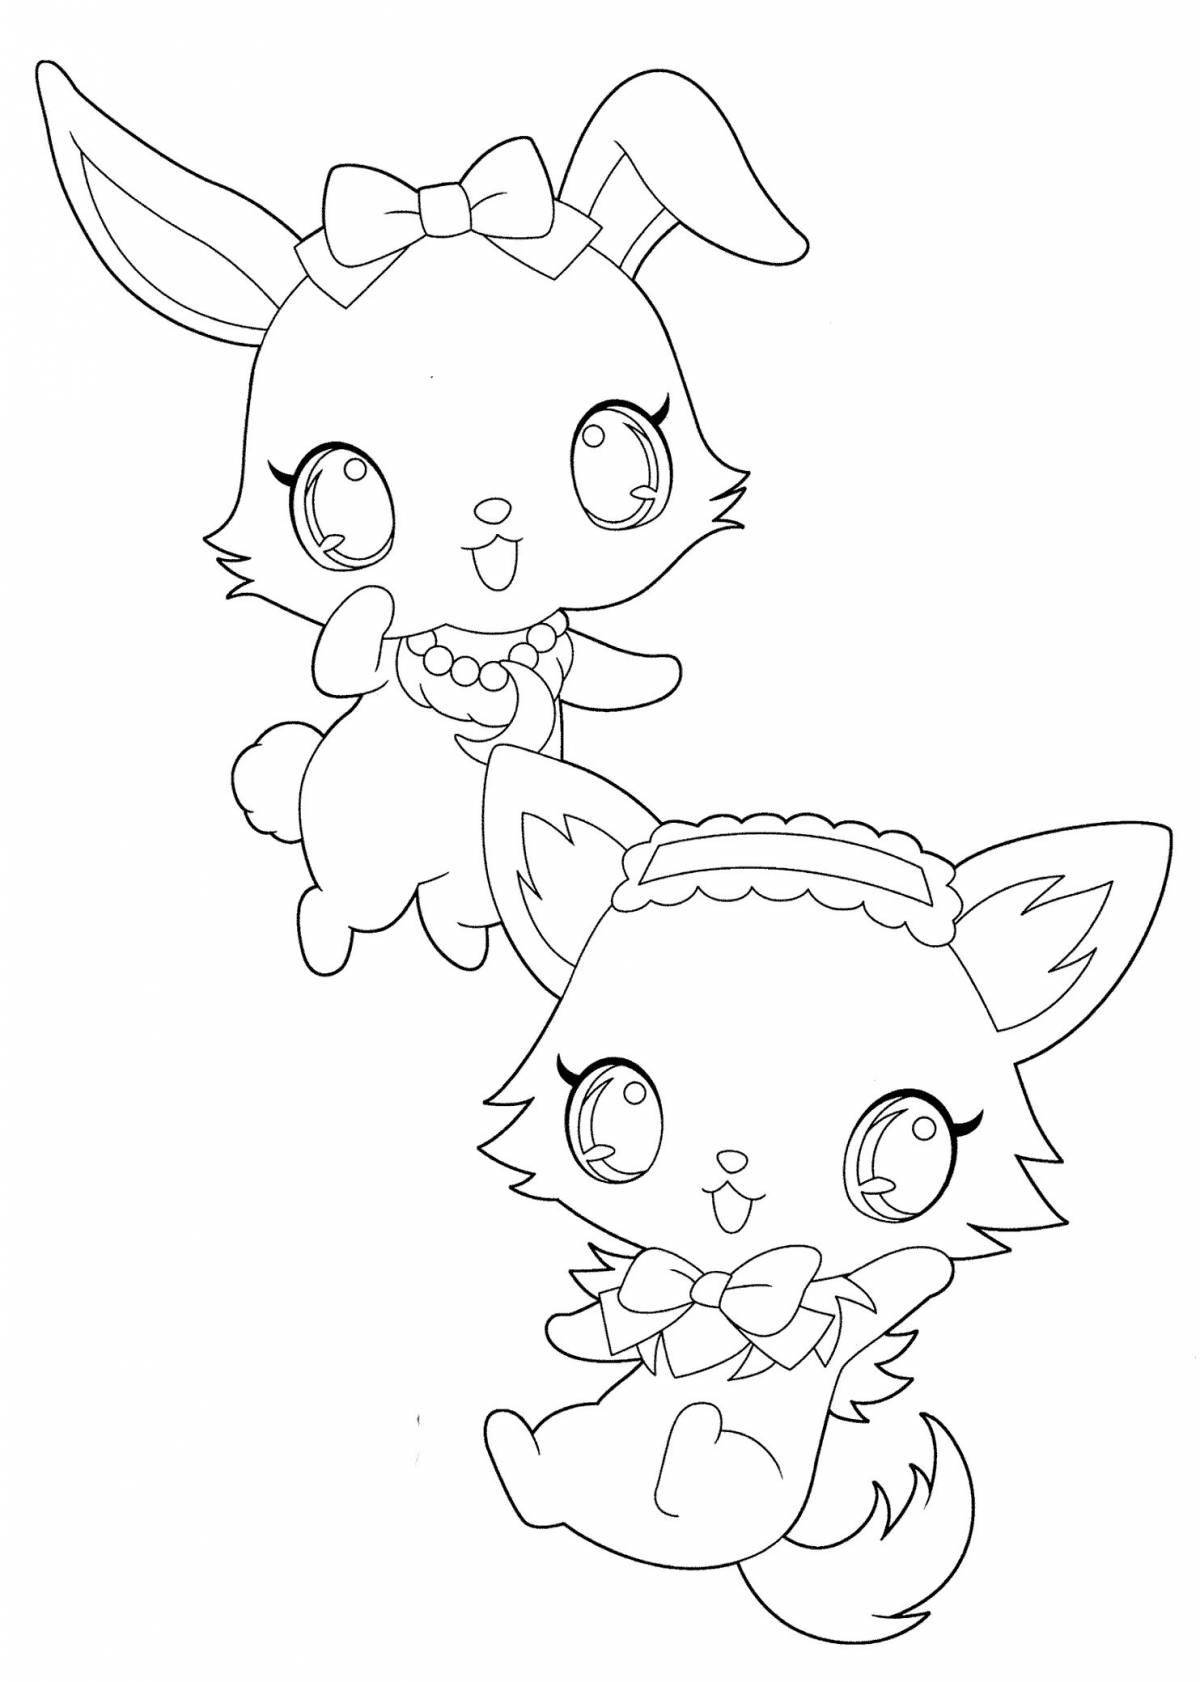 Adorable anime animal coloring book for girls